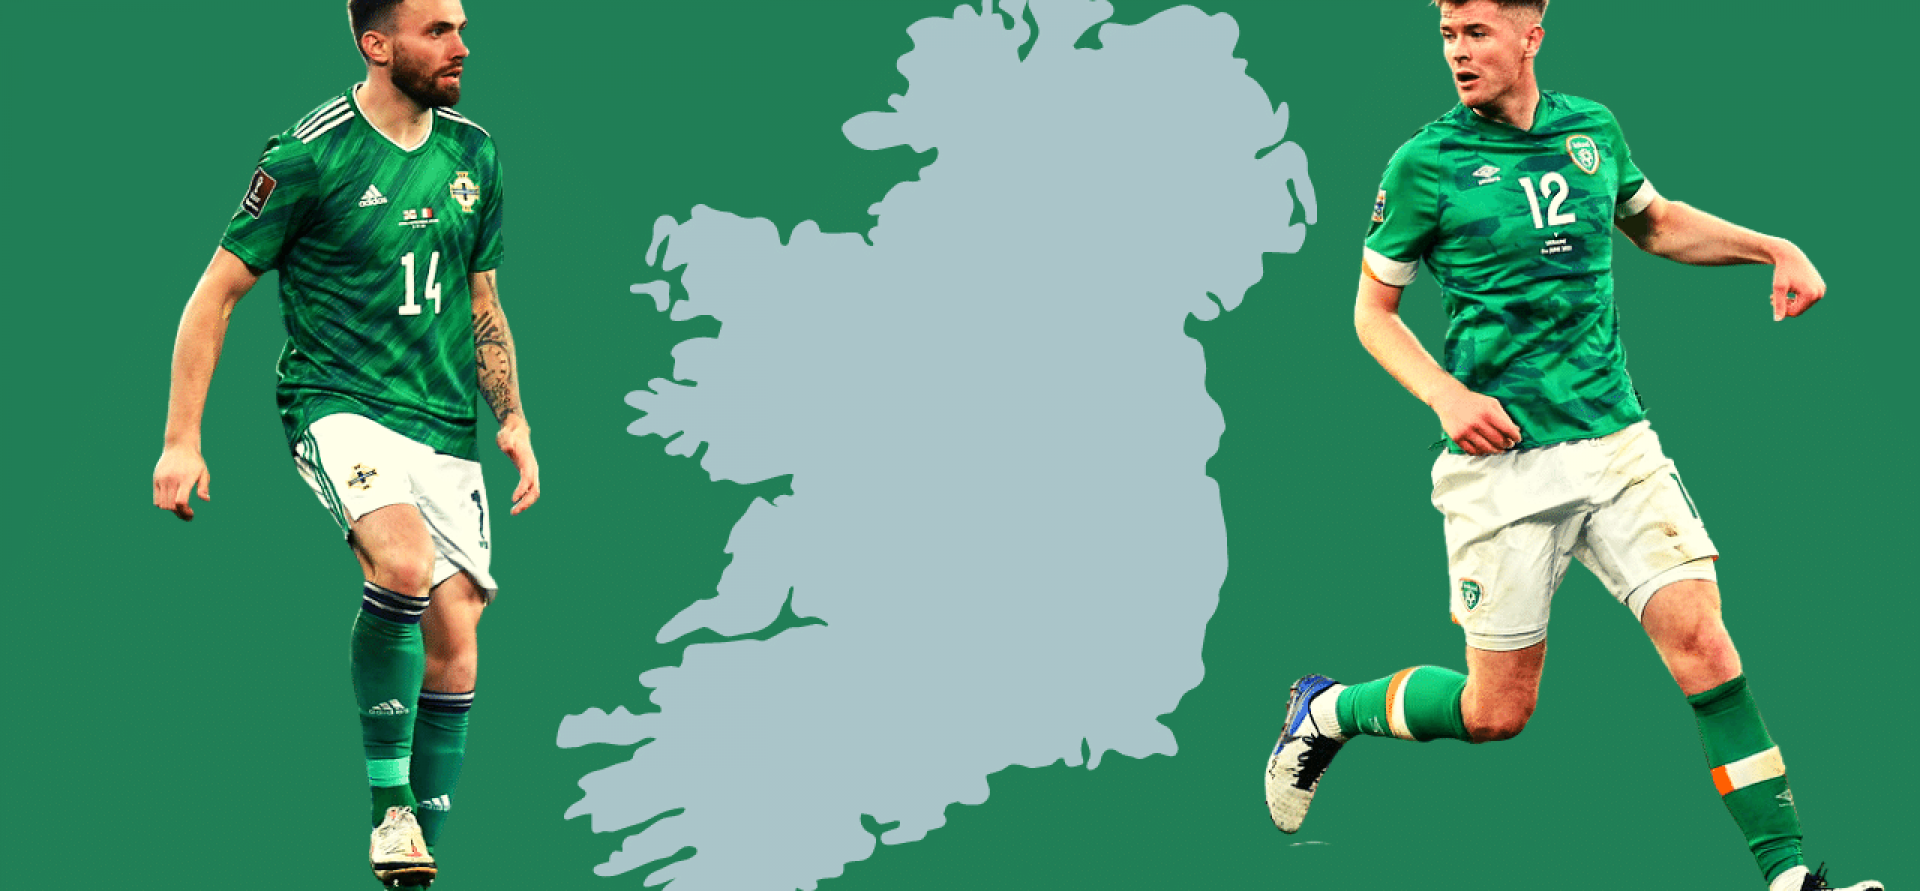 The Best Current Footballer From Each Of The 32 Counties